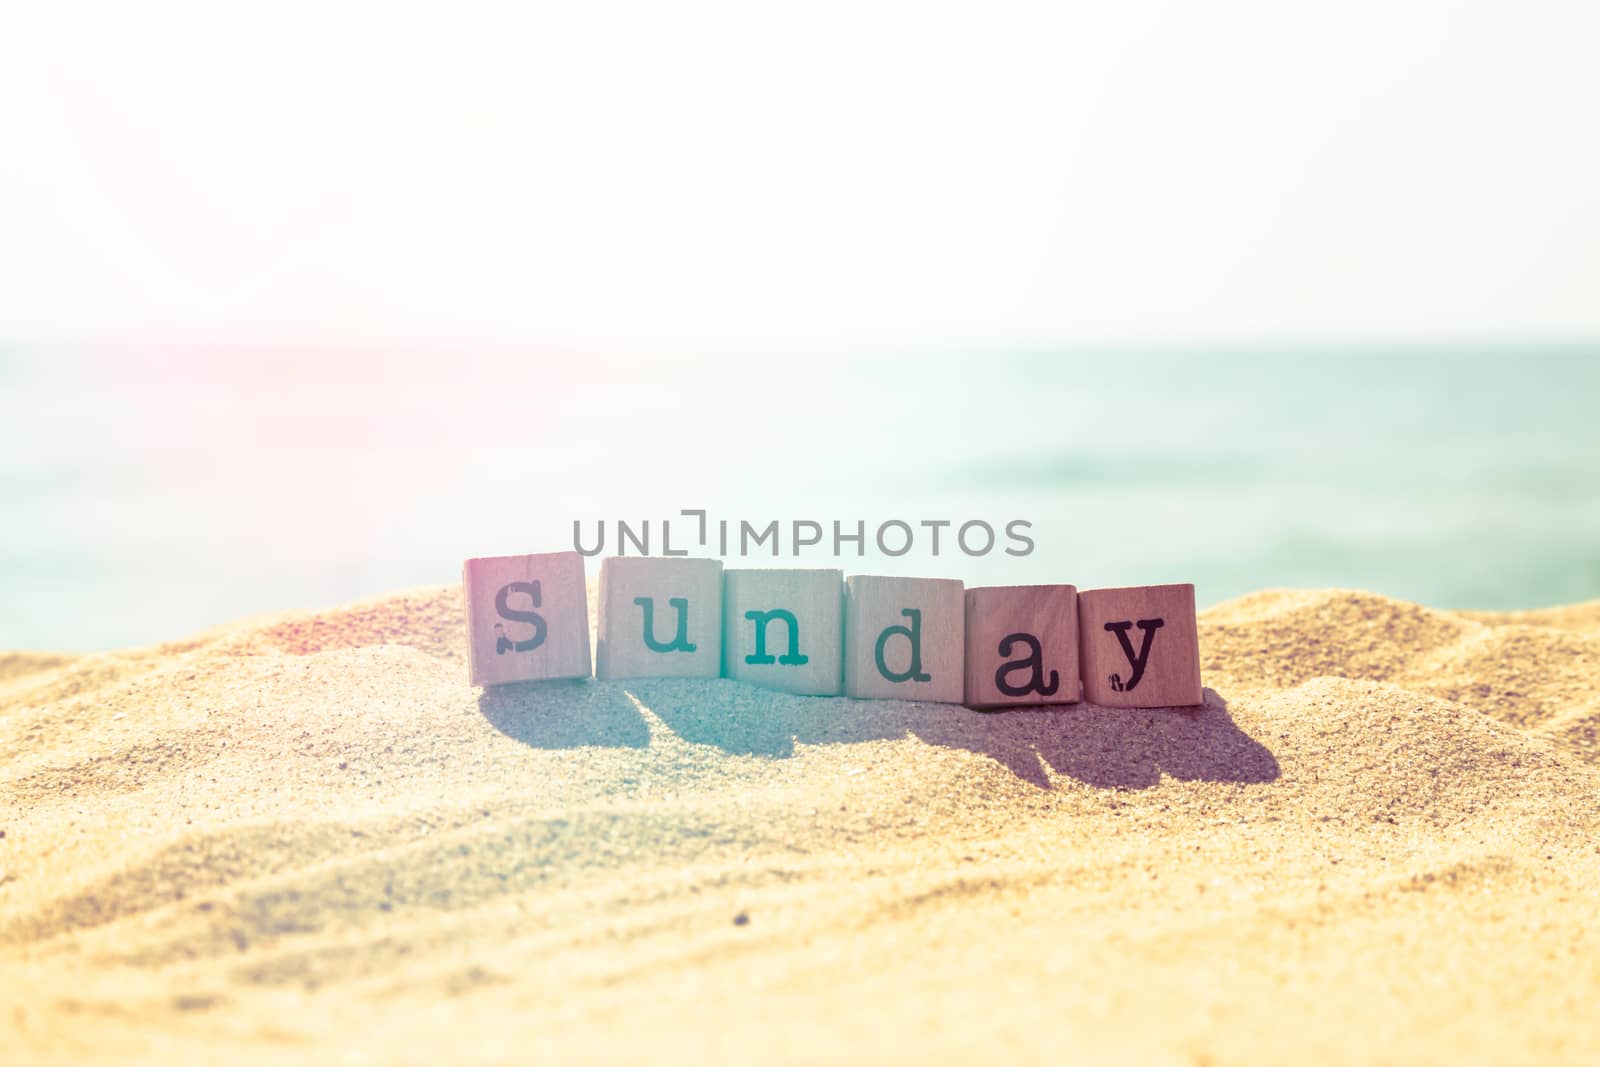 Sunday word on wood rubber stamps stack on sunny beach with beautiful sea view on background, retro style image with light leak